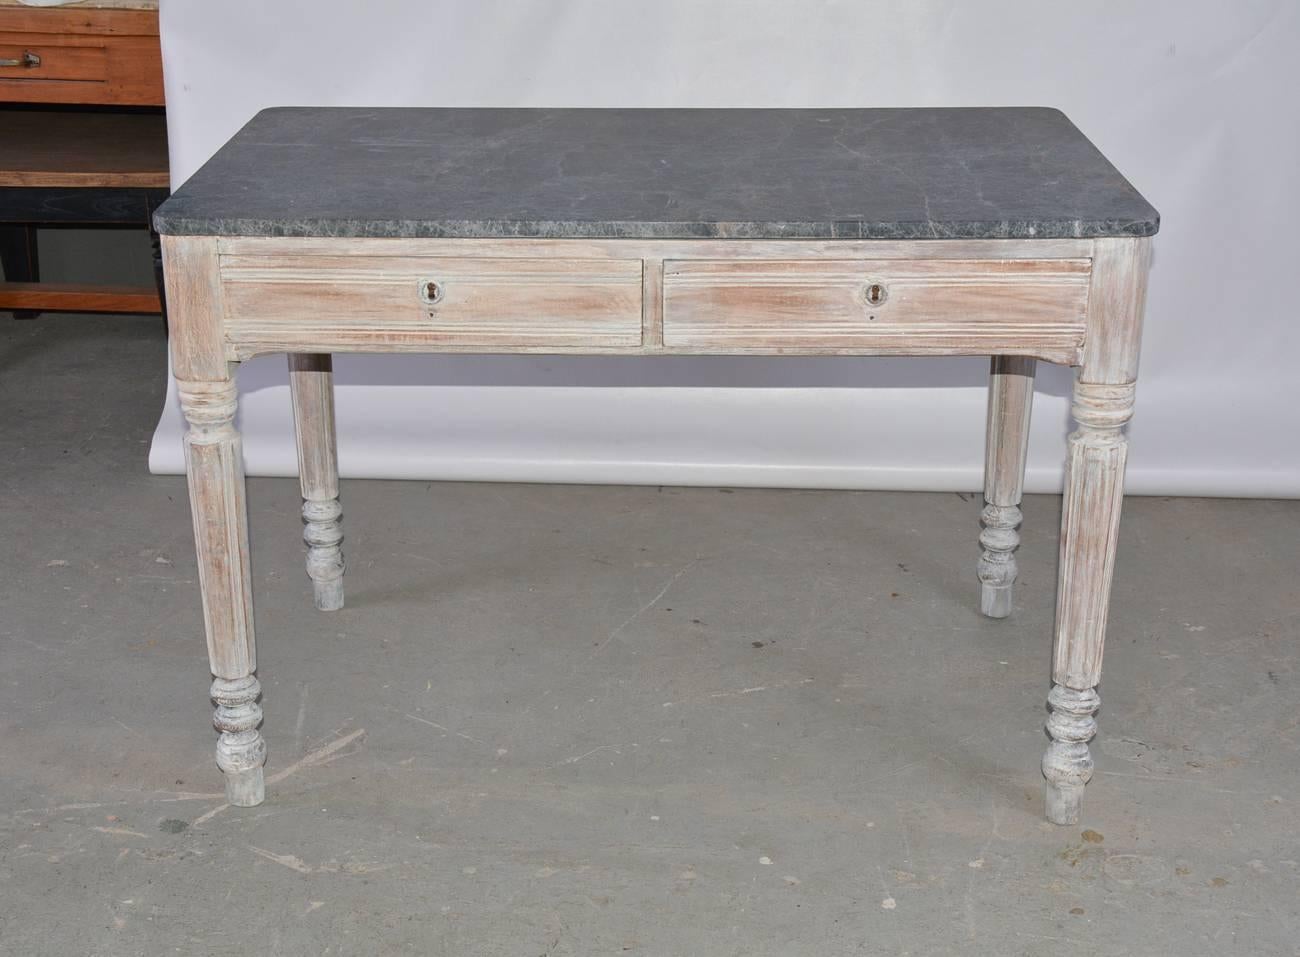 The antique country marble-top desk has two deep drawers, fluted and turned legs and the look of a white-washed finish. The drawers have key holes but no key.

  